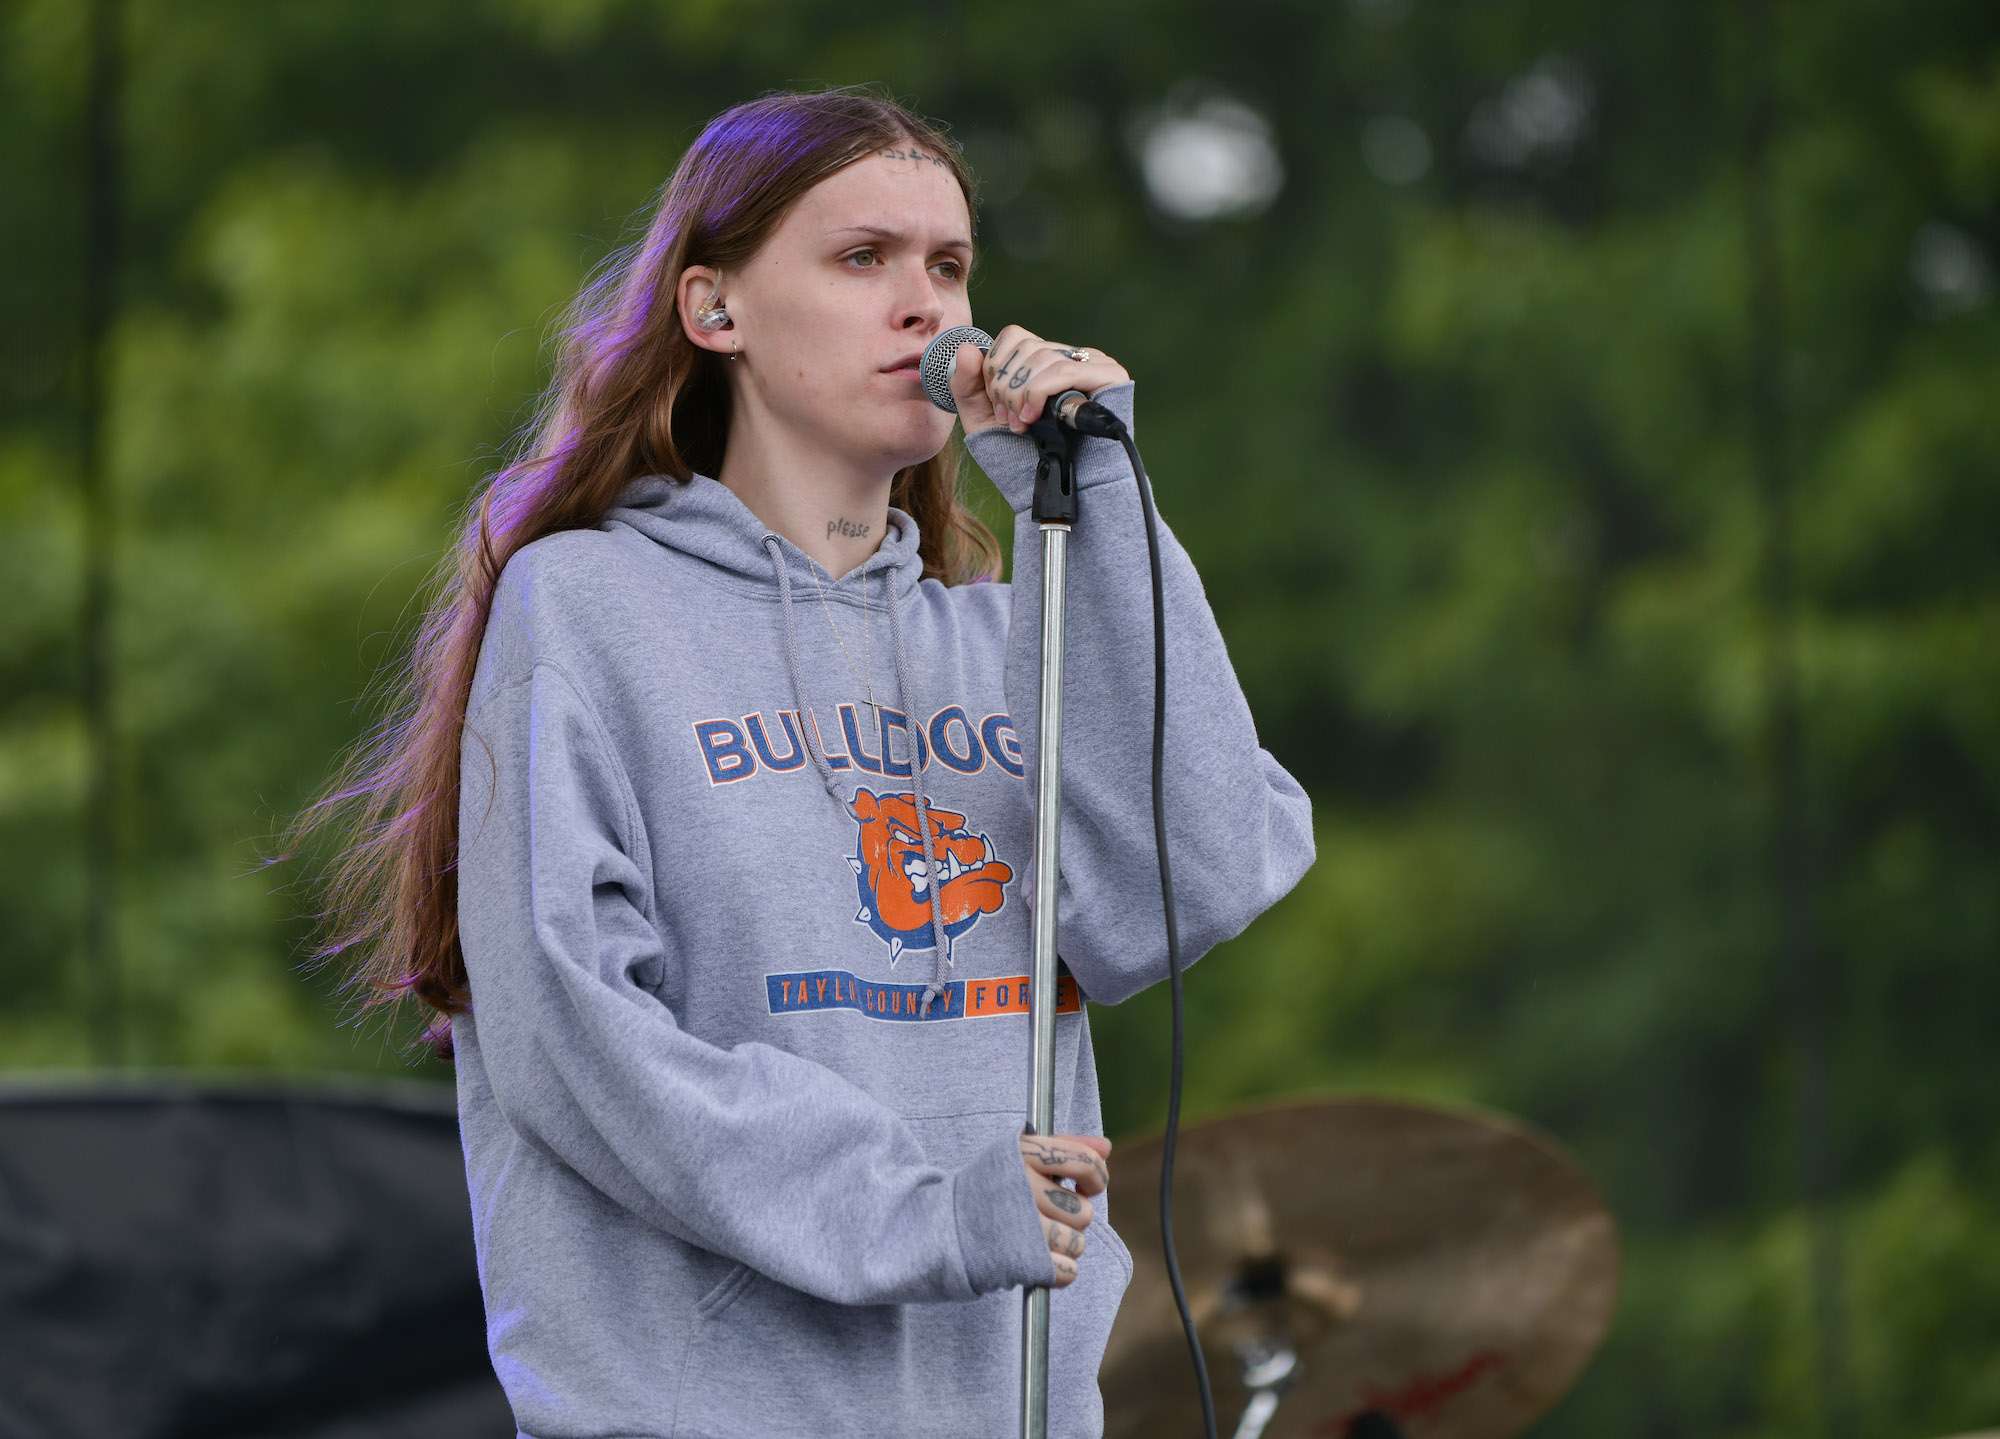 Ethel Cain Live At Pitchfork [GALLERY] 1